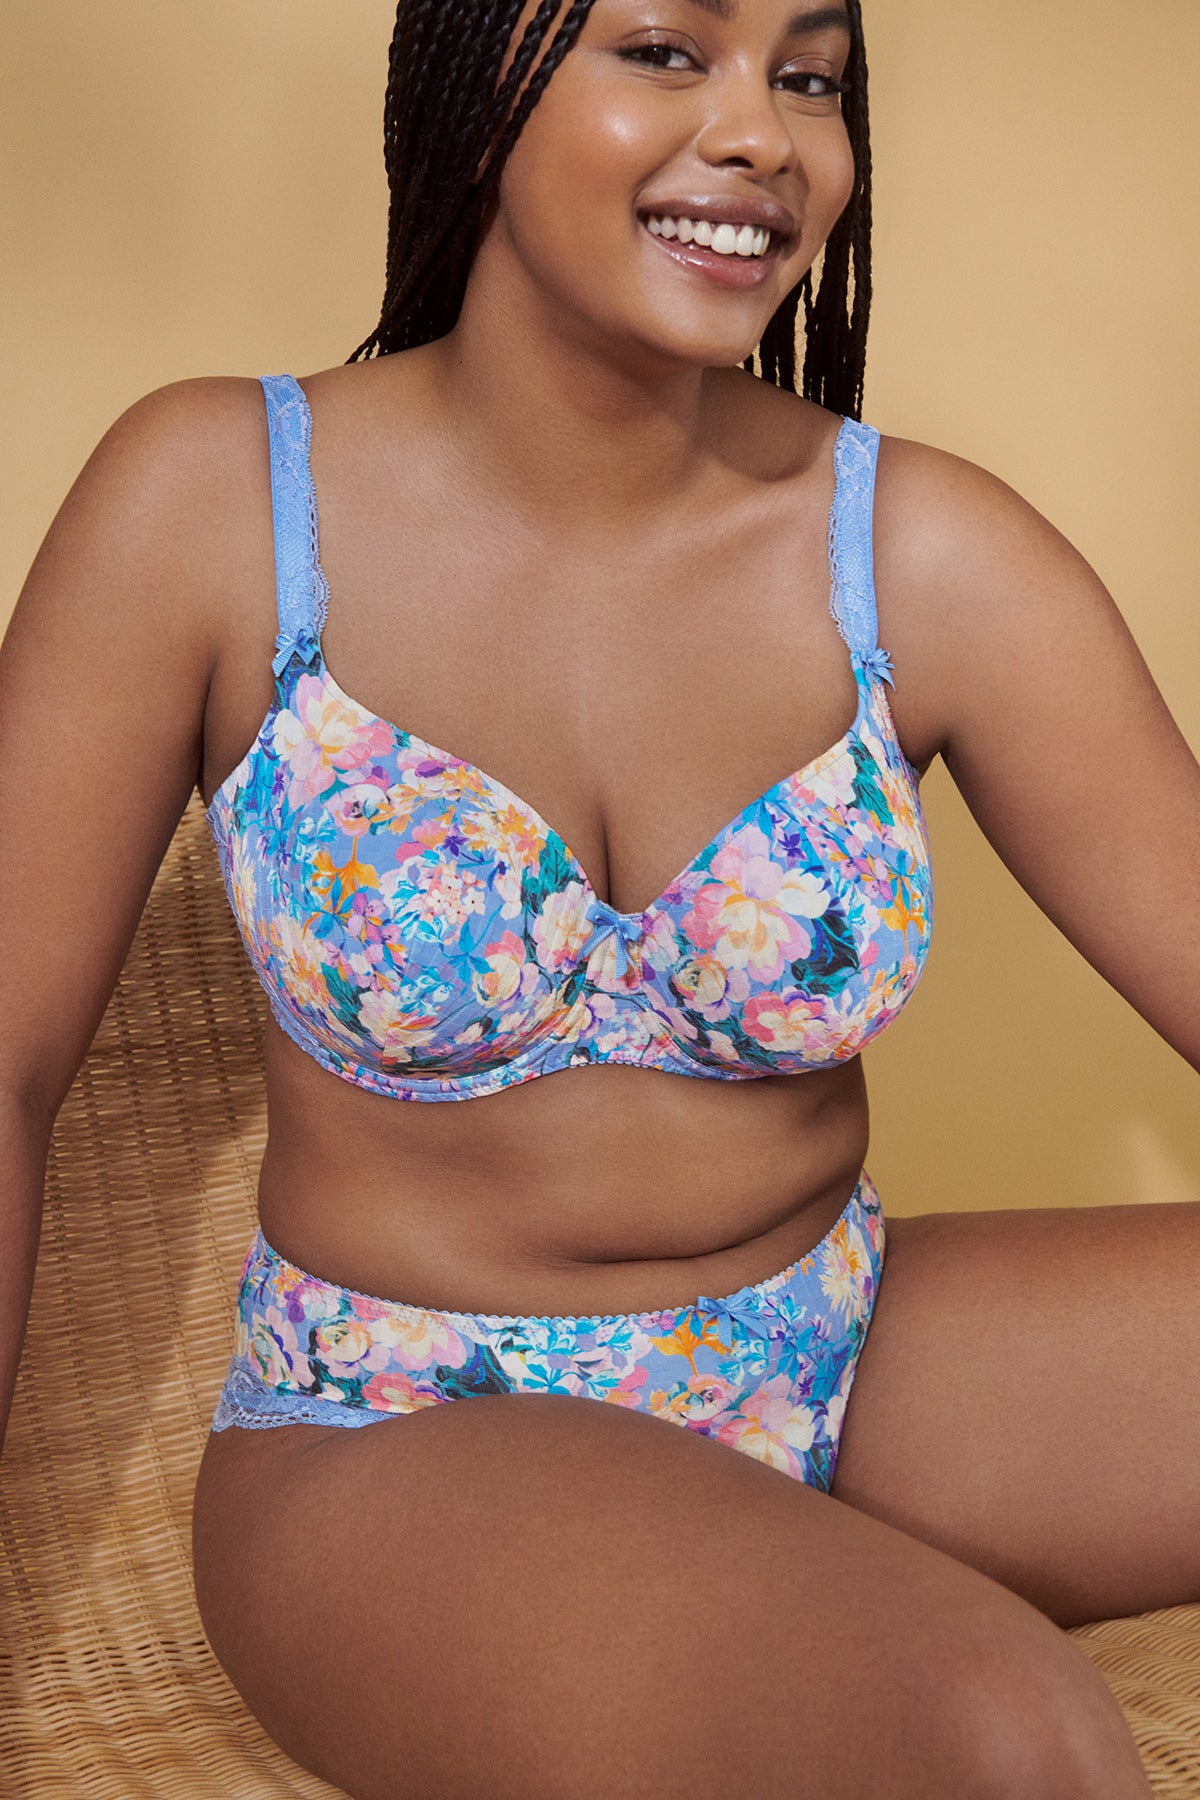 A woman wearing the DD+ Madison Moulded Cup Bra with light padding in Periwinkle Floral by Primadonna.